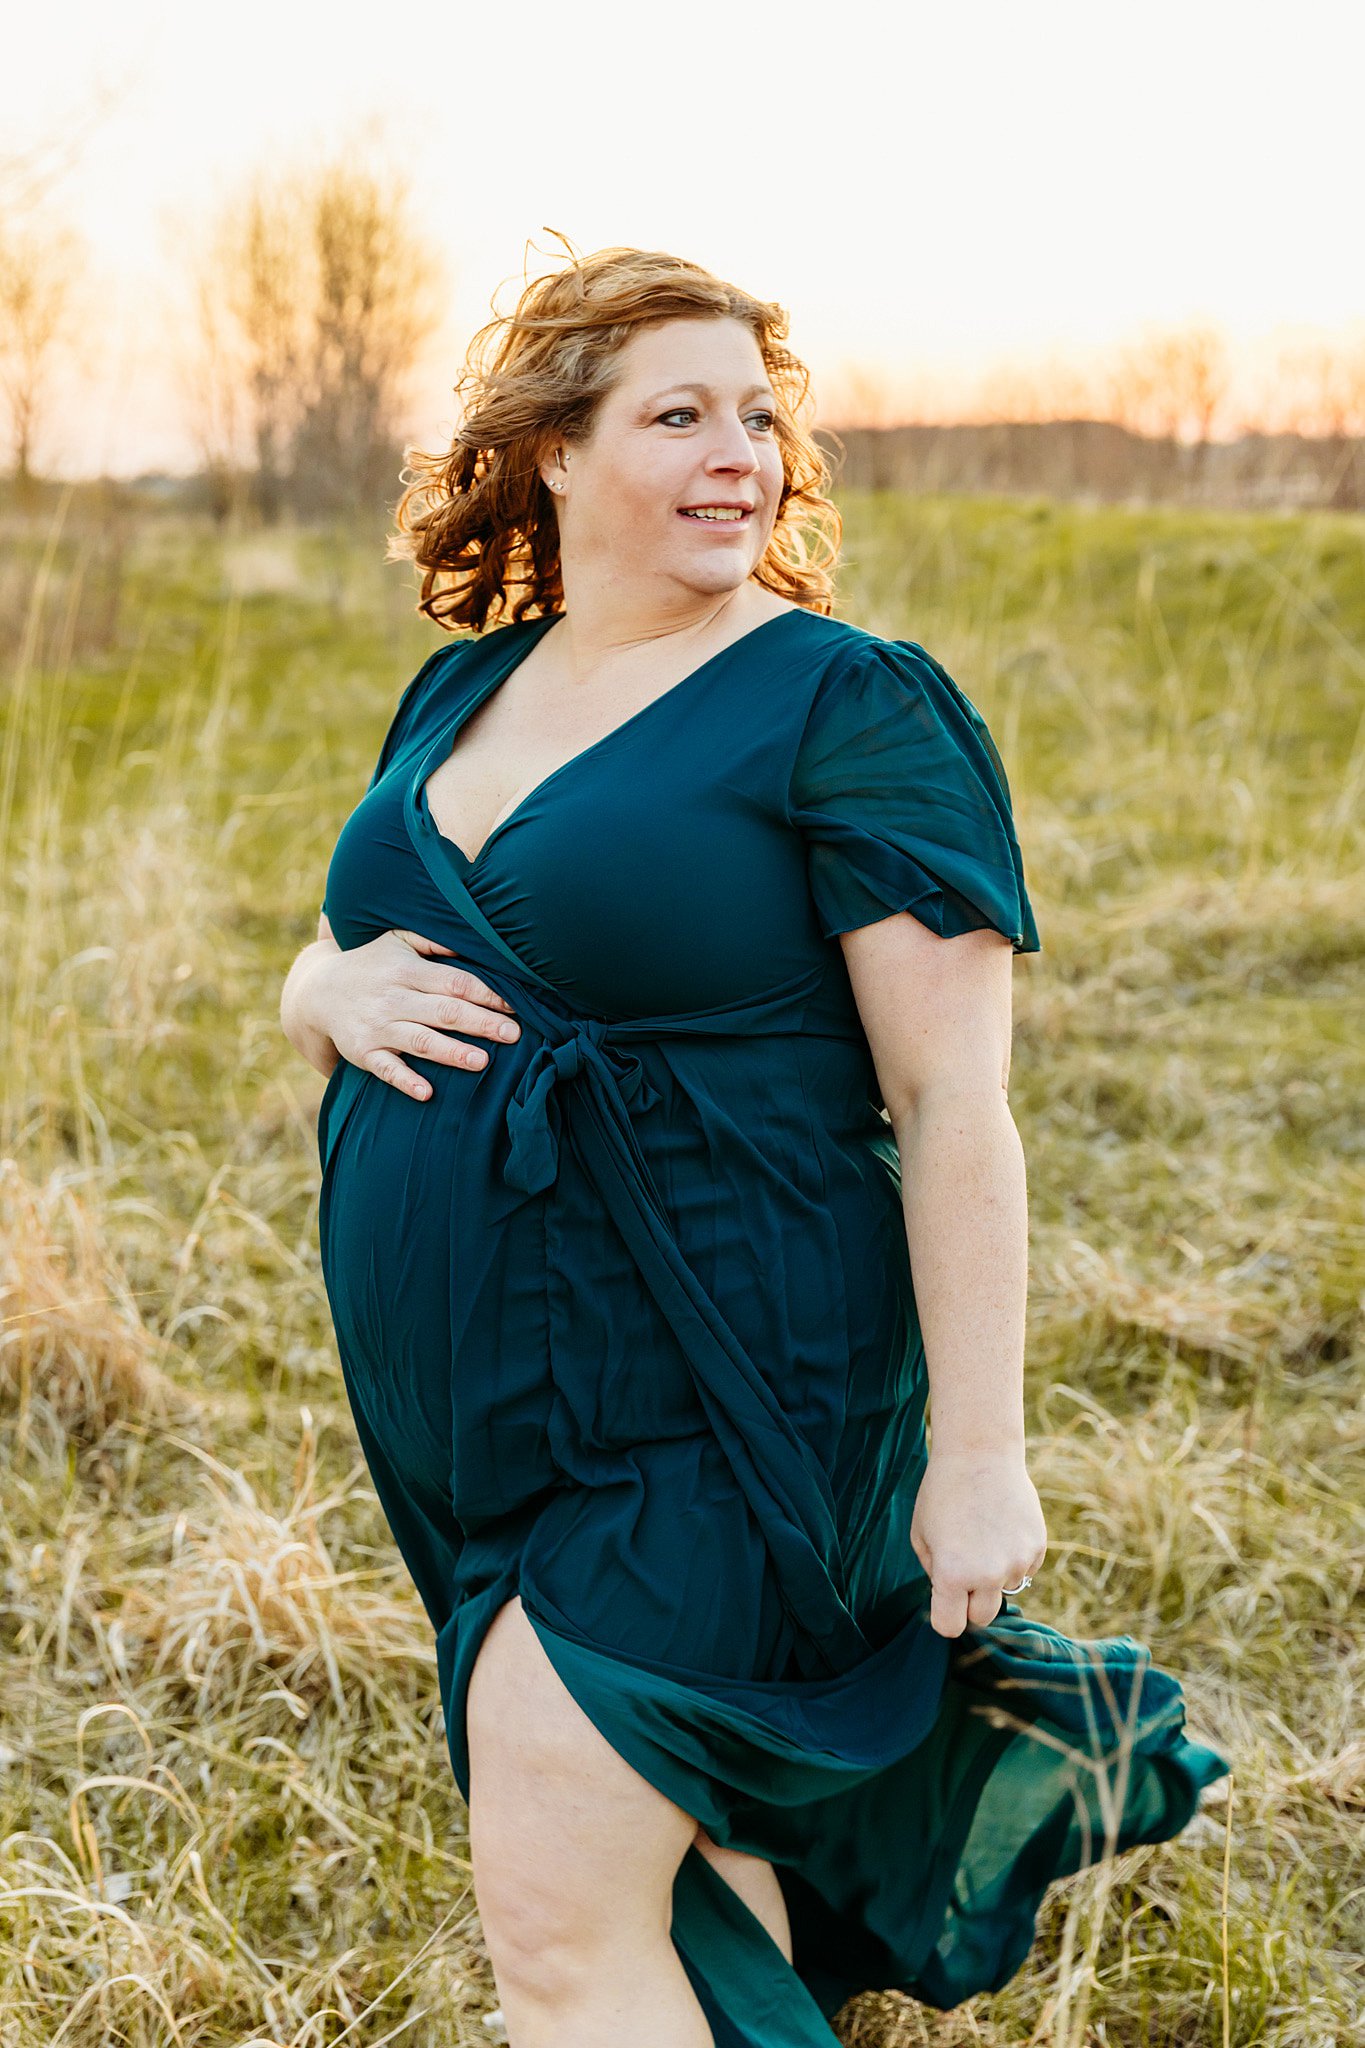 A mother to be in a blue dress that is blowing in the wind stands in an open field at sunset Door County Massage